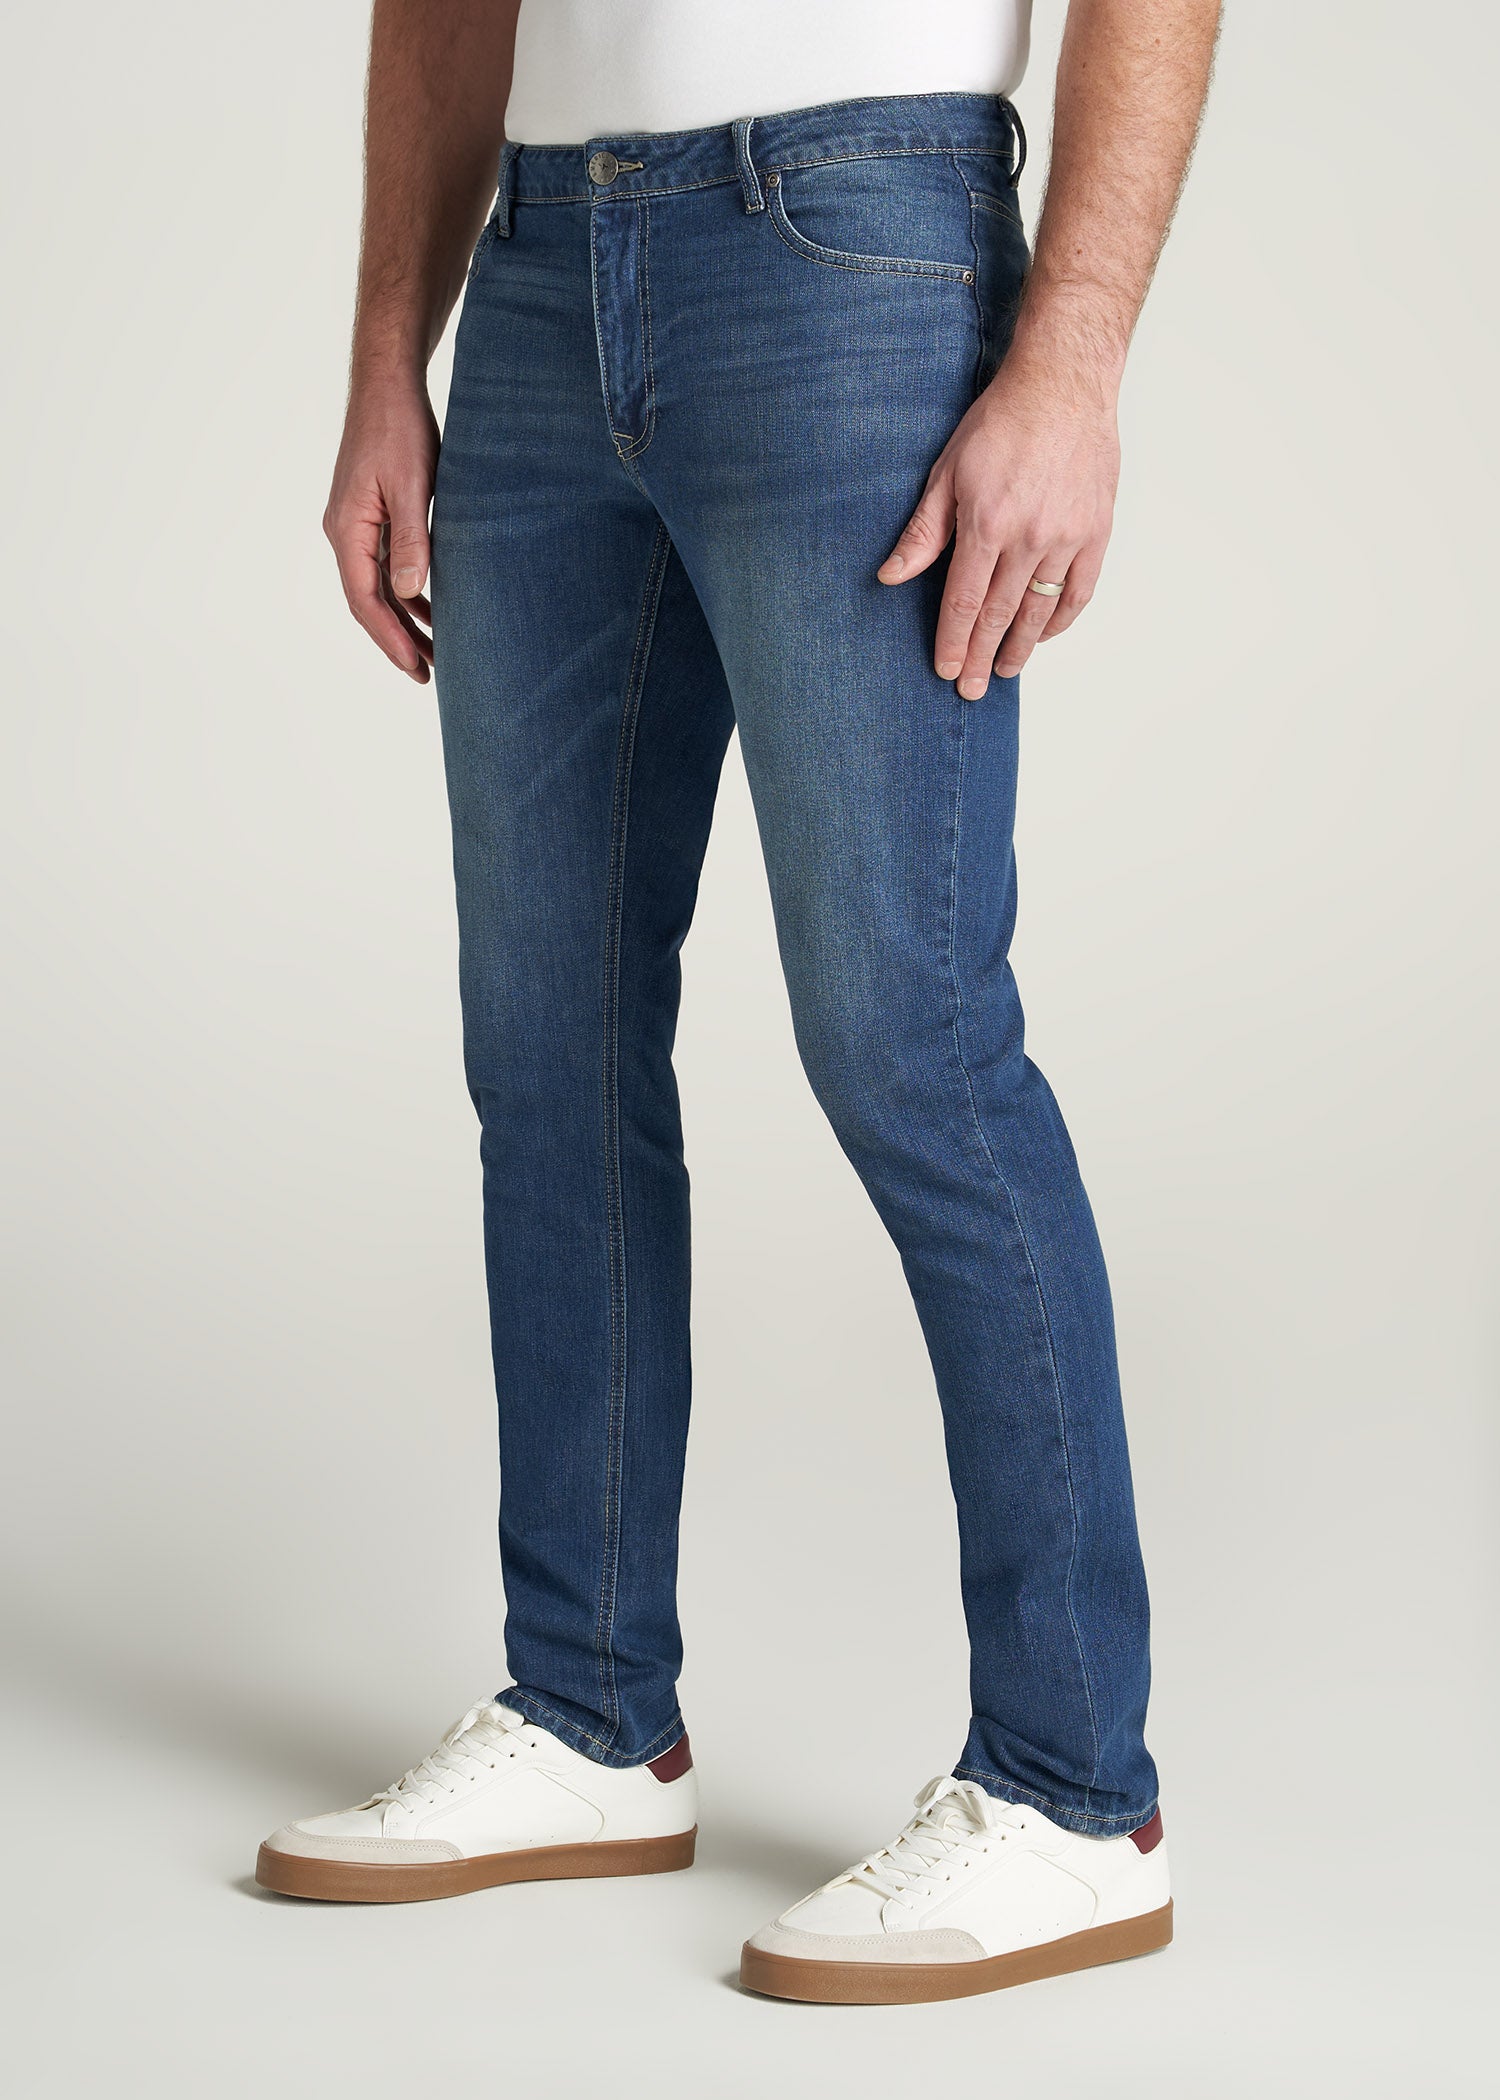 Buy Nuon by Westside Black Distressed Rodeo Carrot-Fit Jeans for Online @  Tata CLiQ